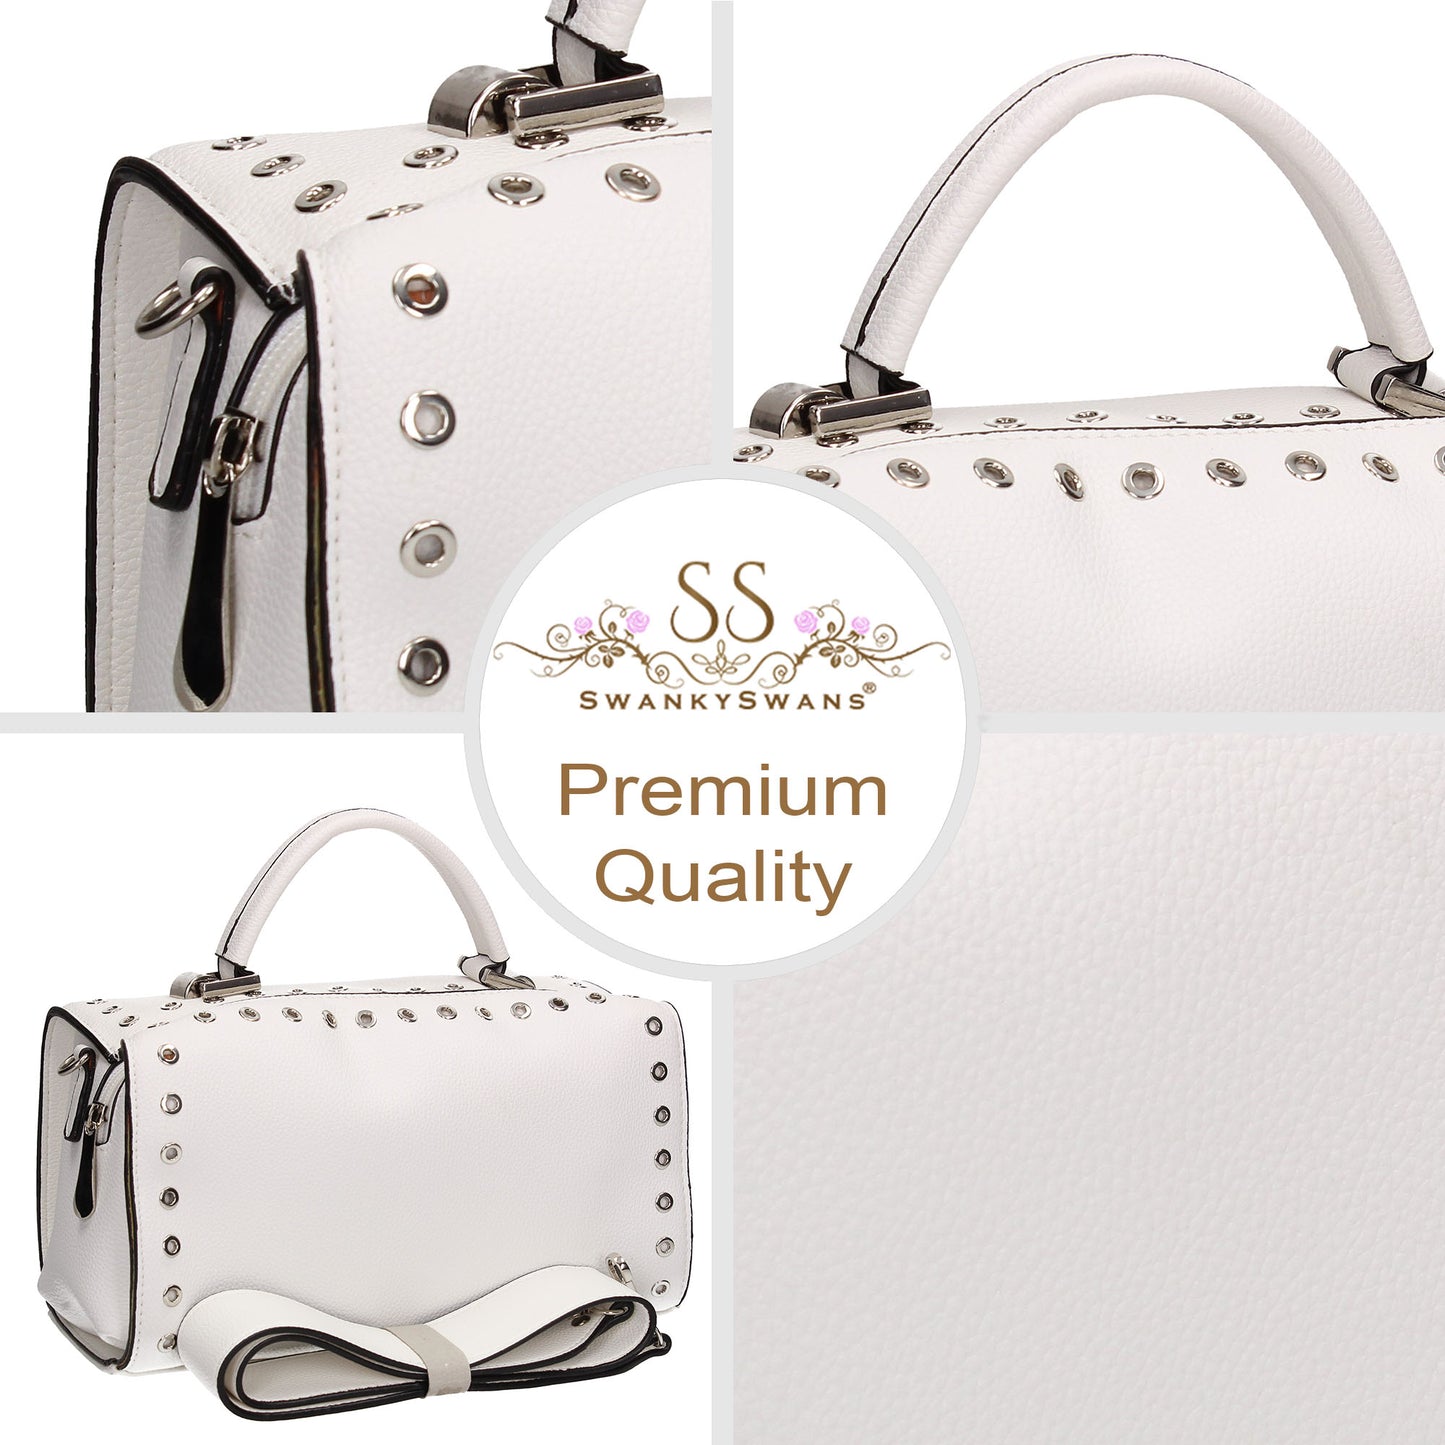 Buy your Anna Handbag White Today! Buy with confidence from Swankyswans